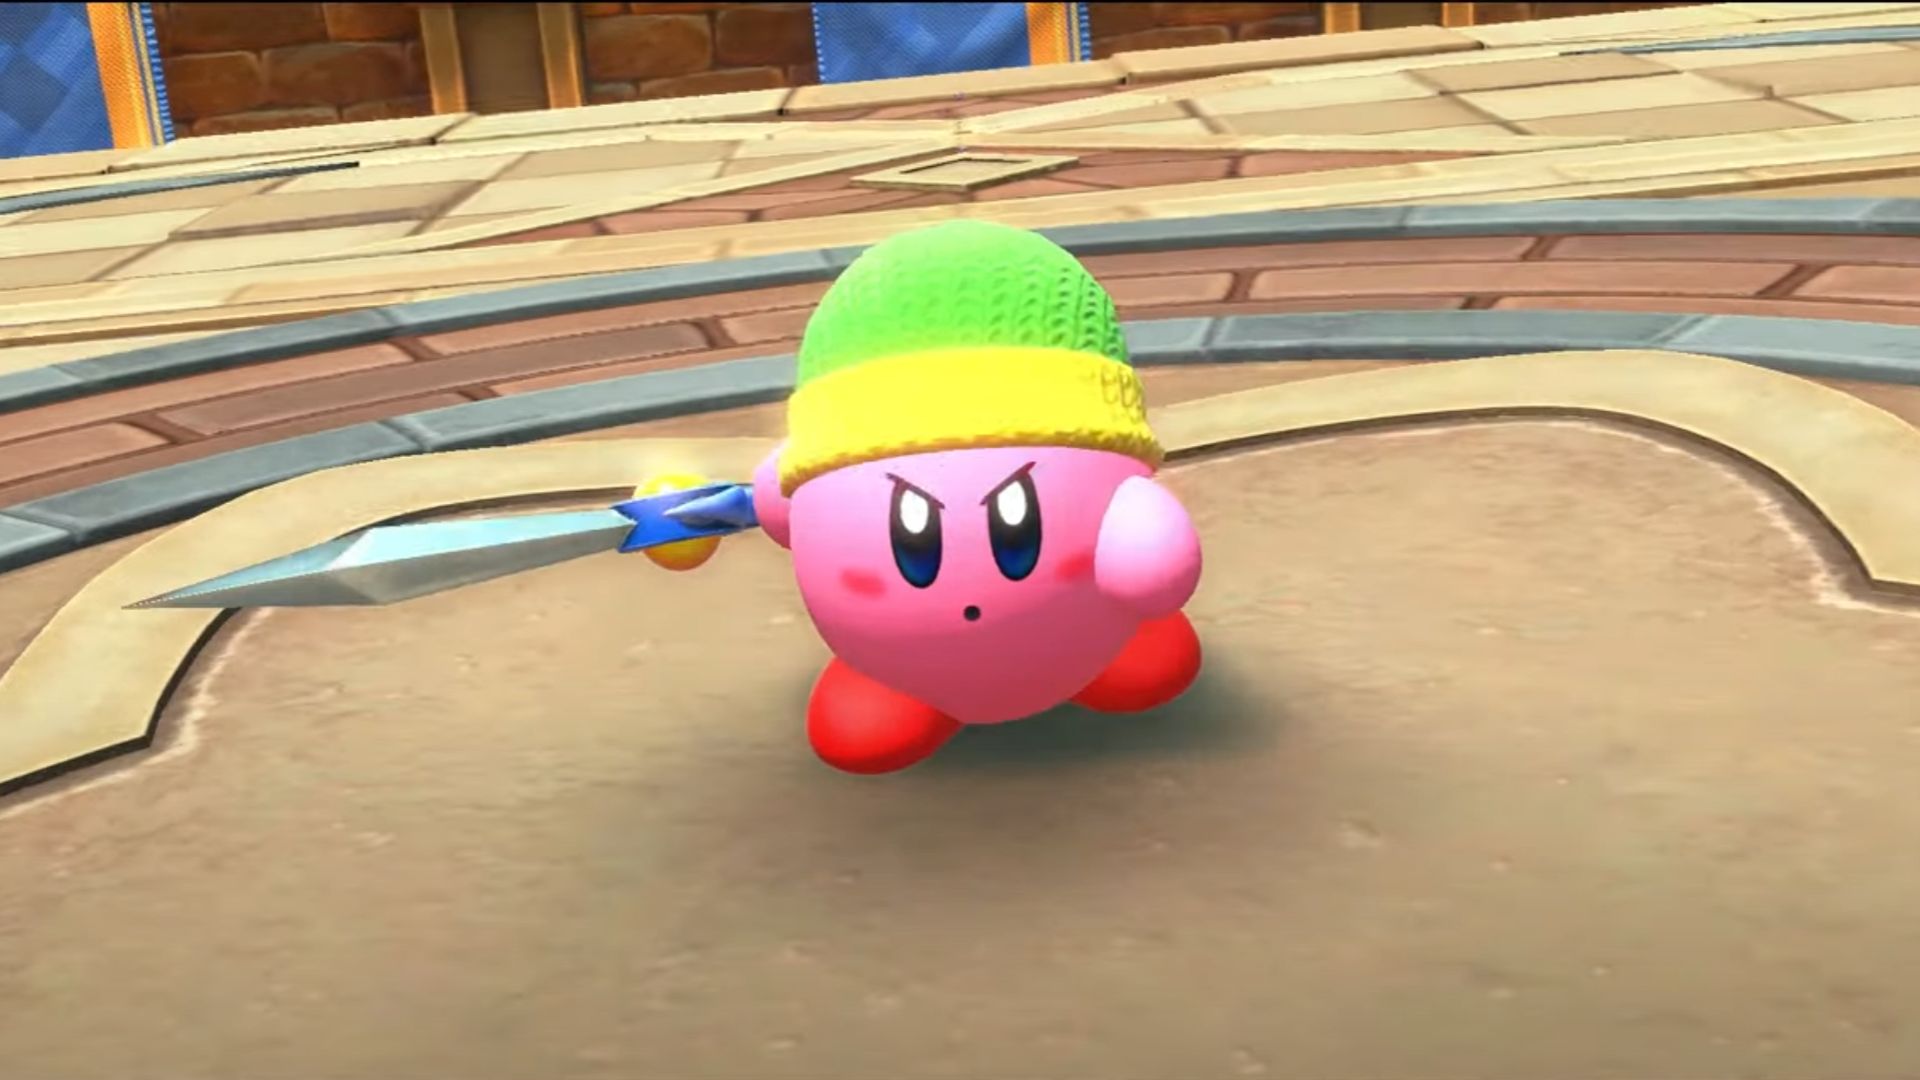 Kirby and the Forgotten Land is coming to the Switch next year - The Verge